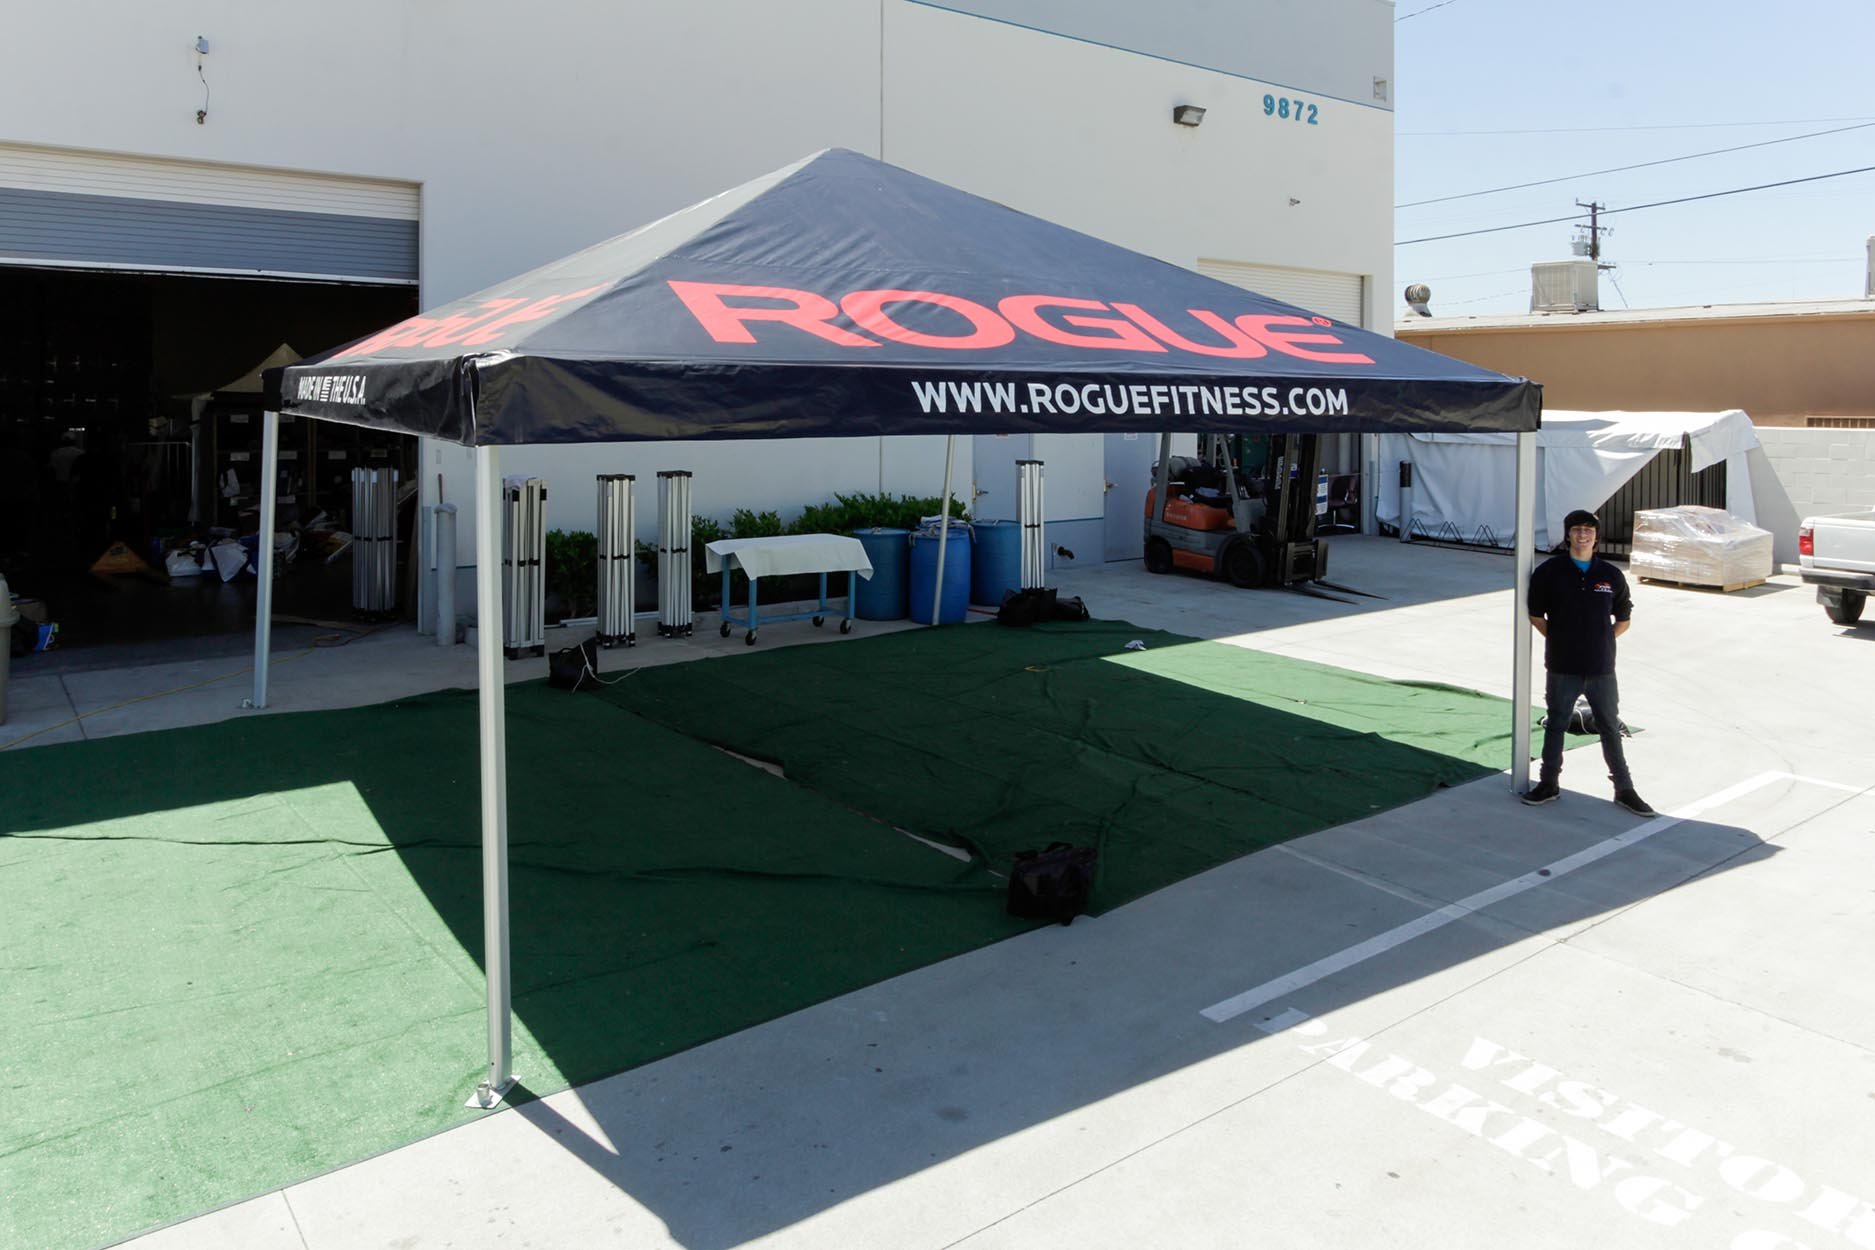 Rogue Fitness 20x20 Standard Frame Tent with a printed tent top and a person standing next to it for size comparison